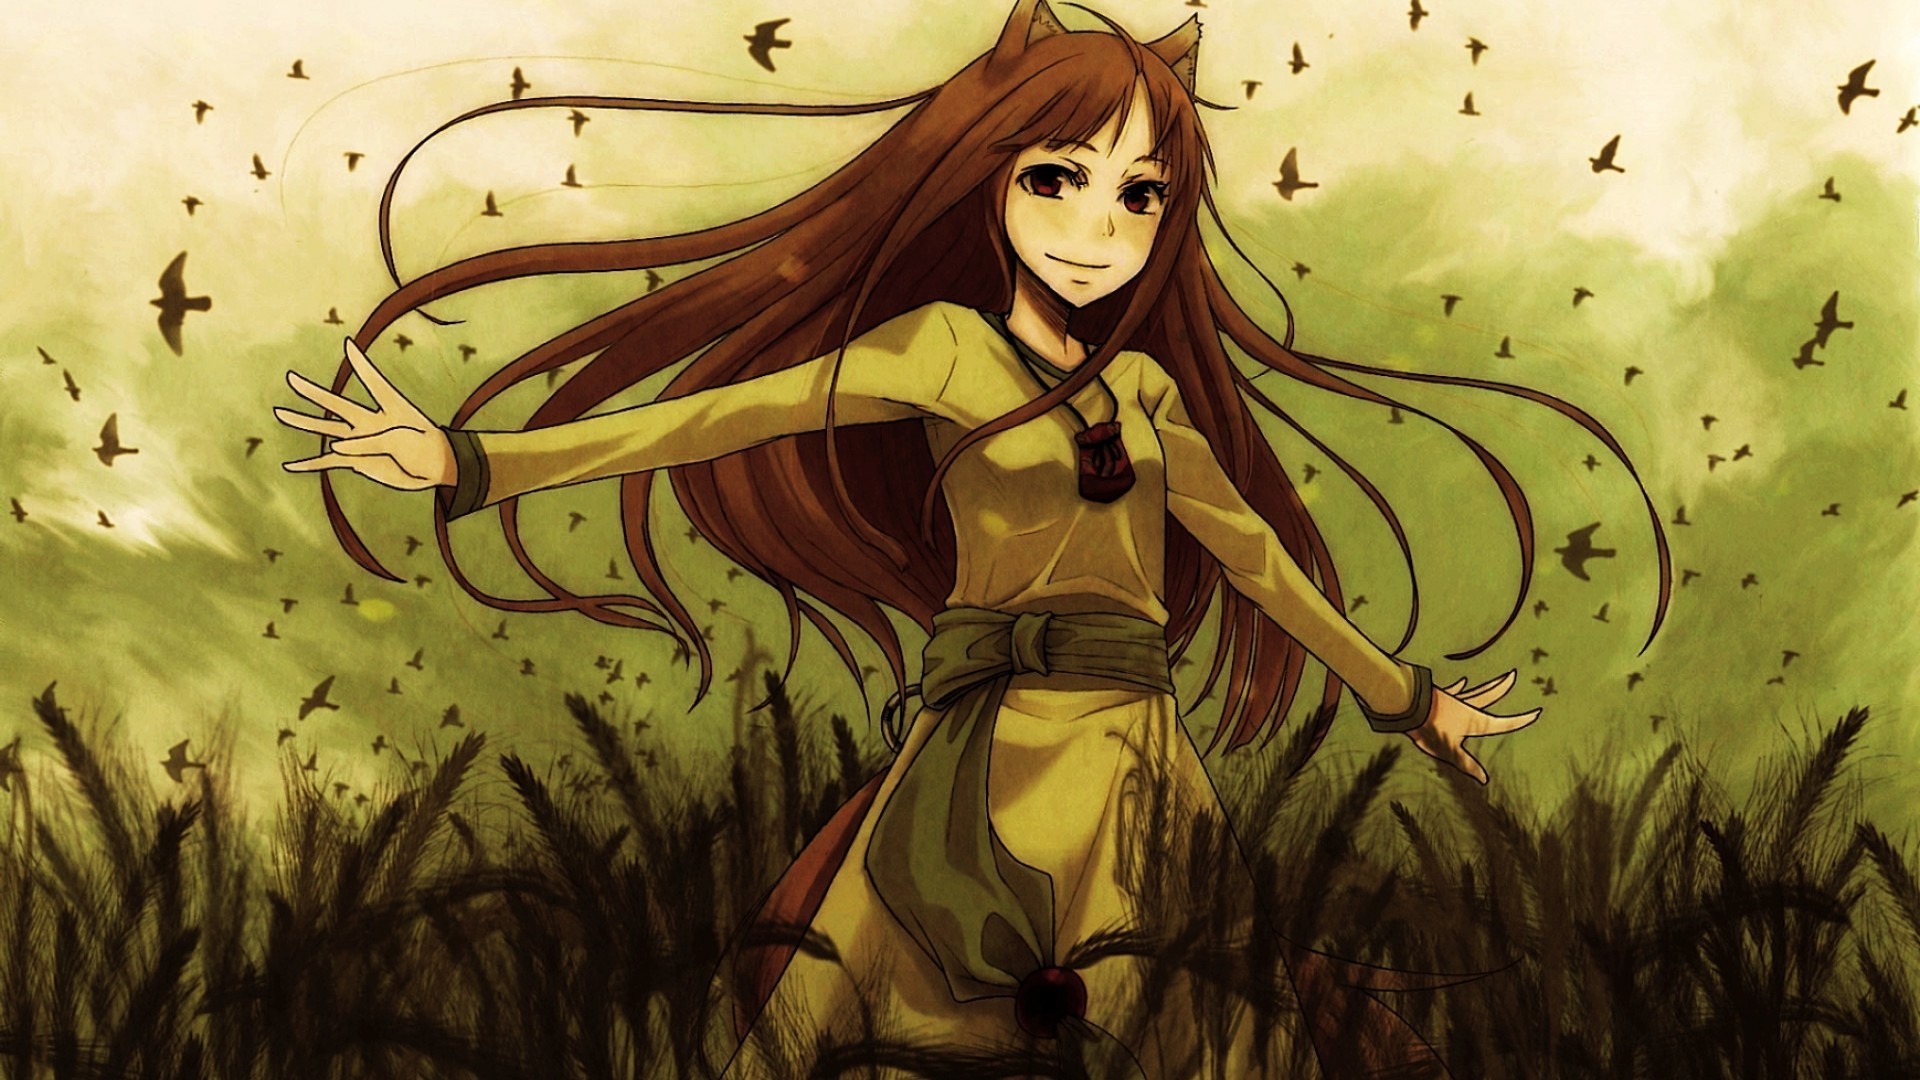 Anime, Anime Girls, Spice And Wolf, Holo, Kitsunemimi Wallpapers HD / Desktop and Mobile Backgrounds